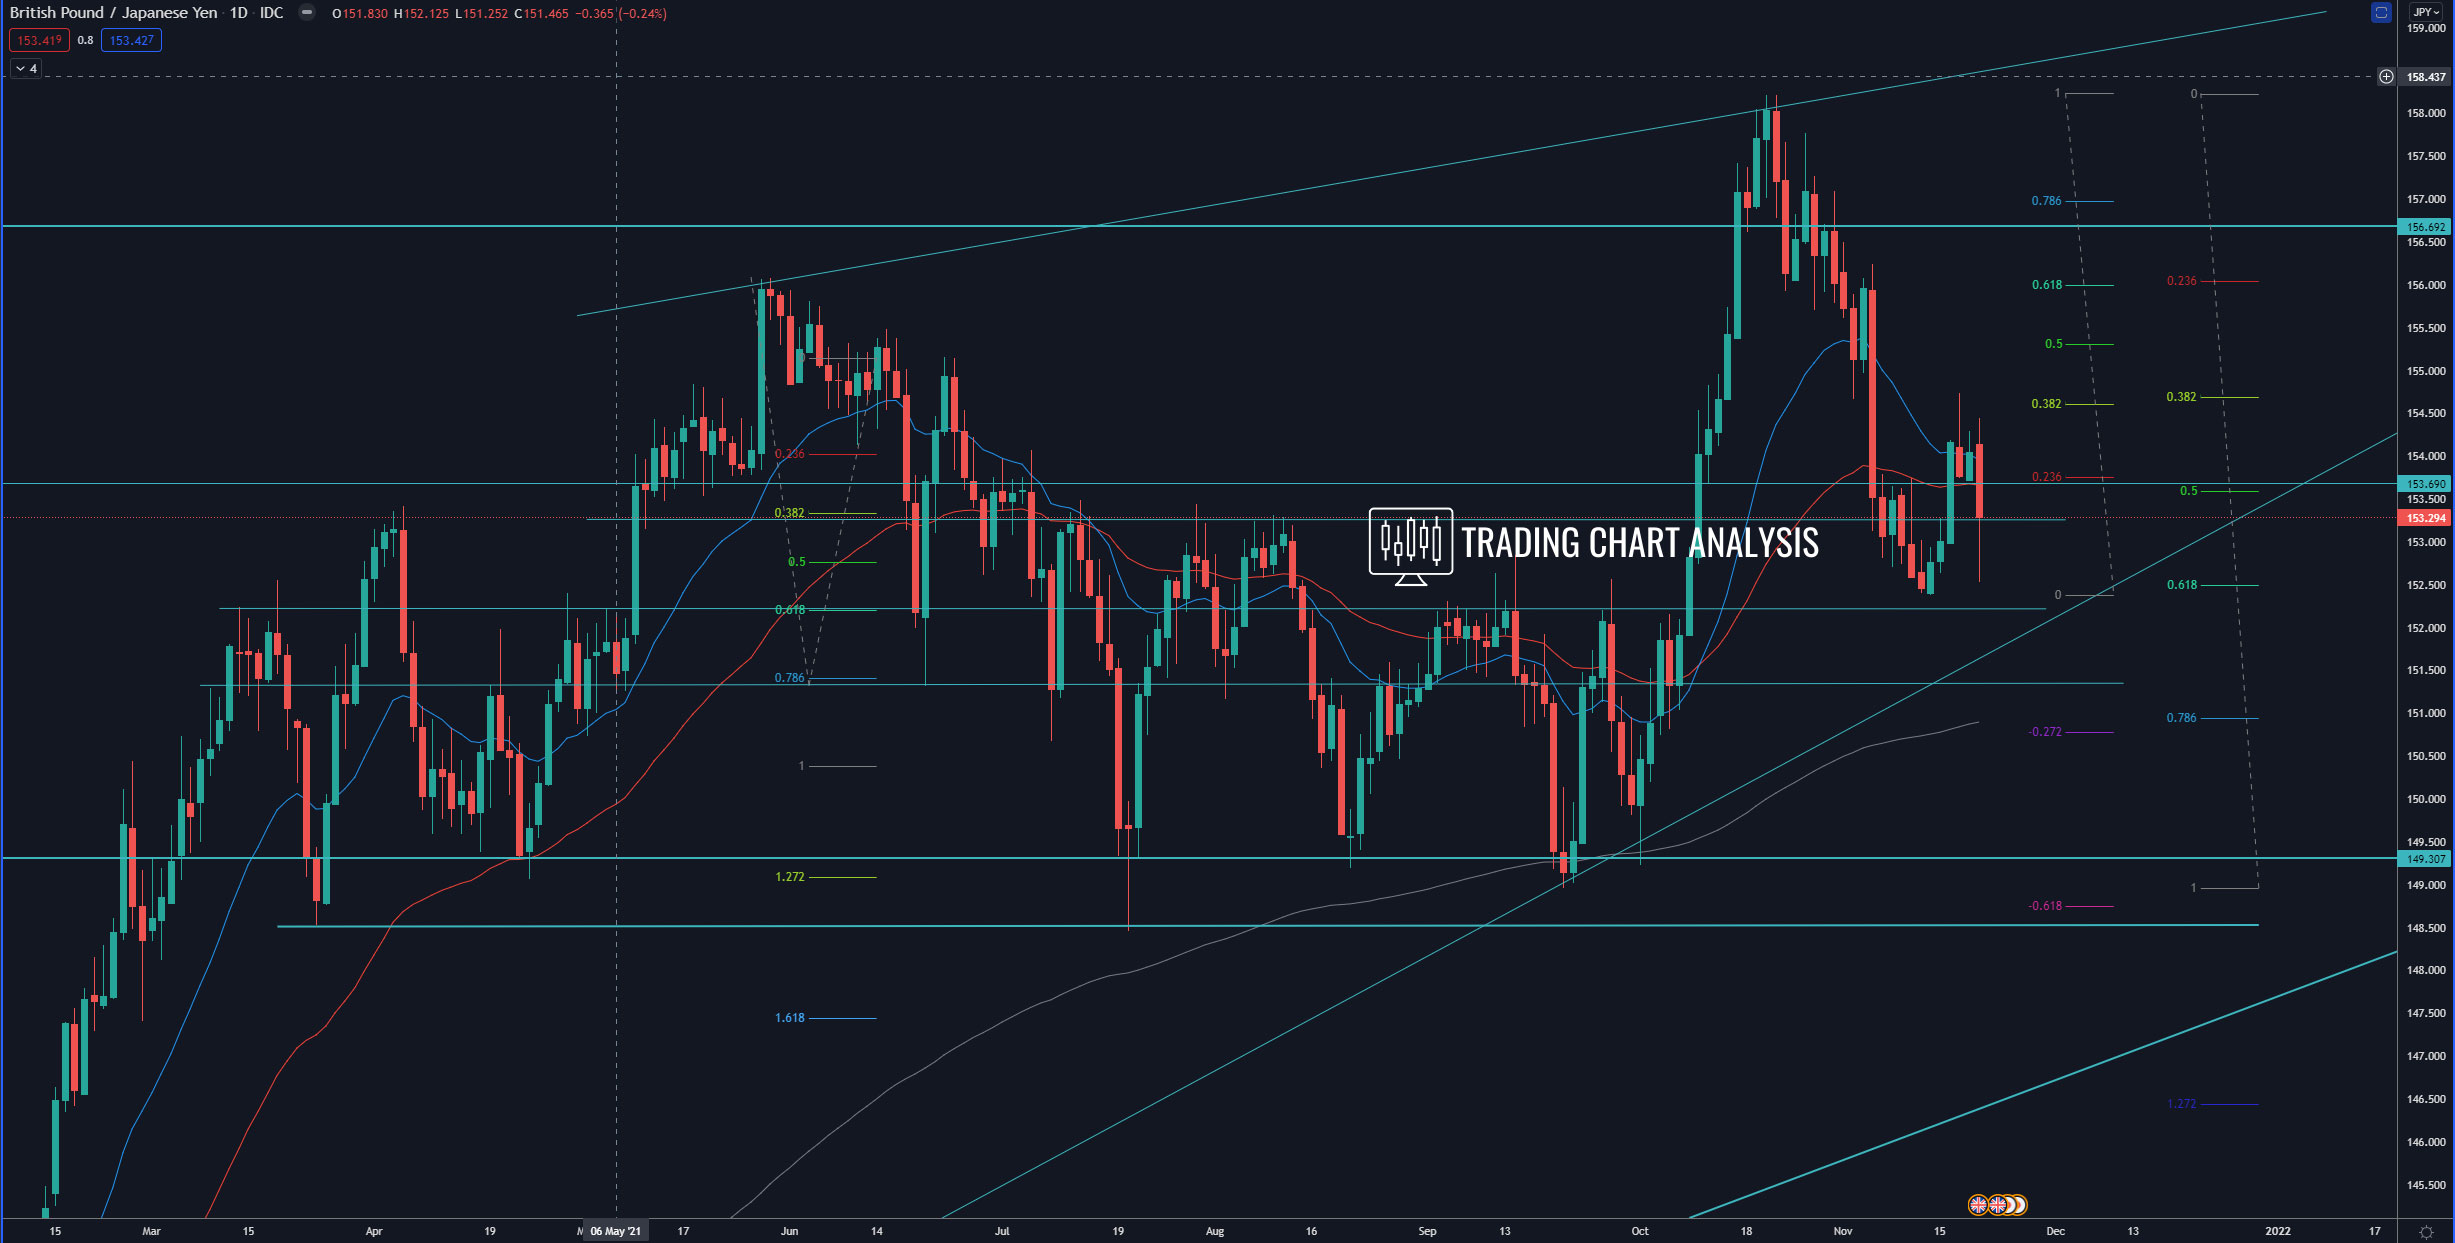 GBP/JPY daily chart Technical analysis trading/investing